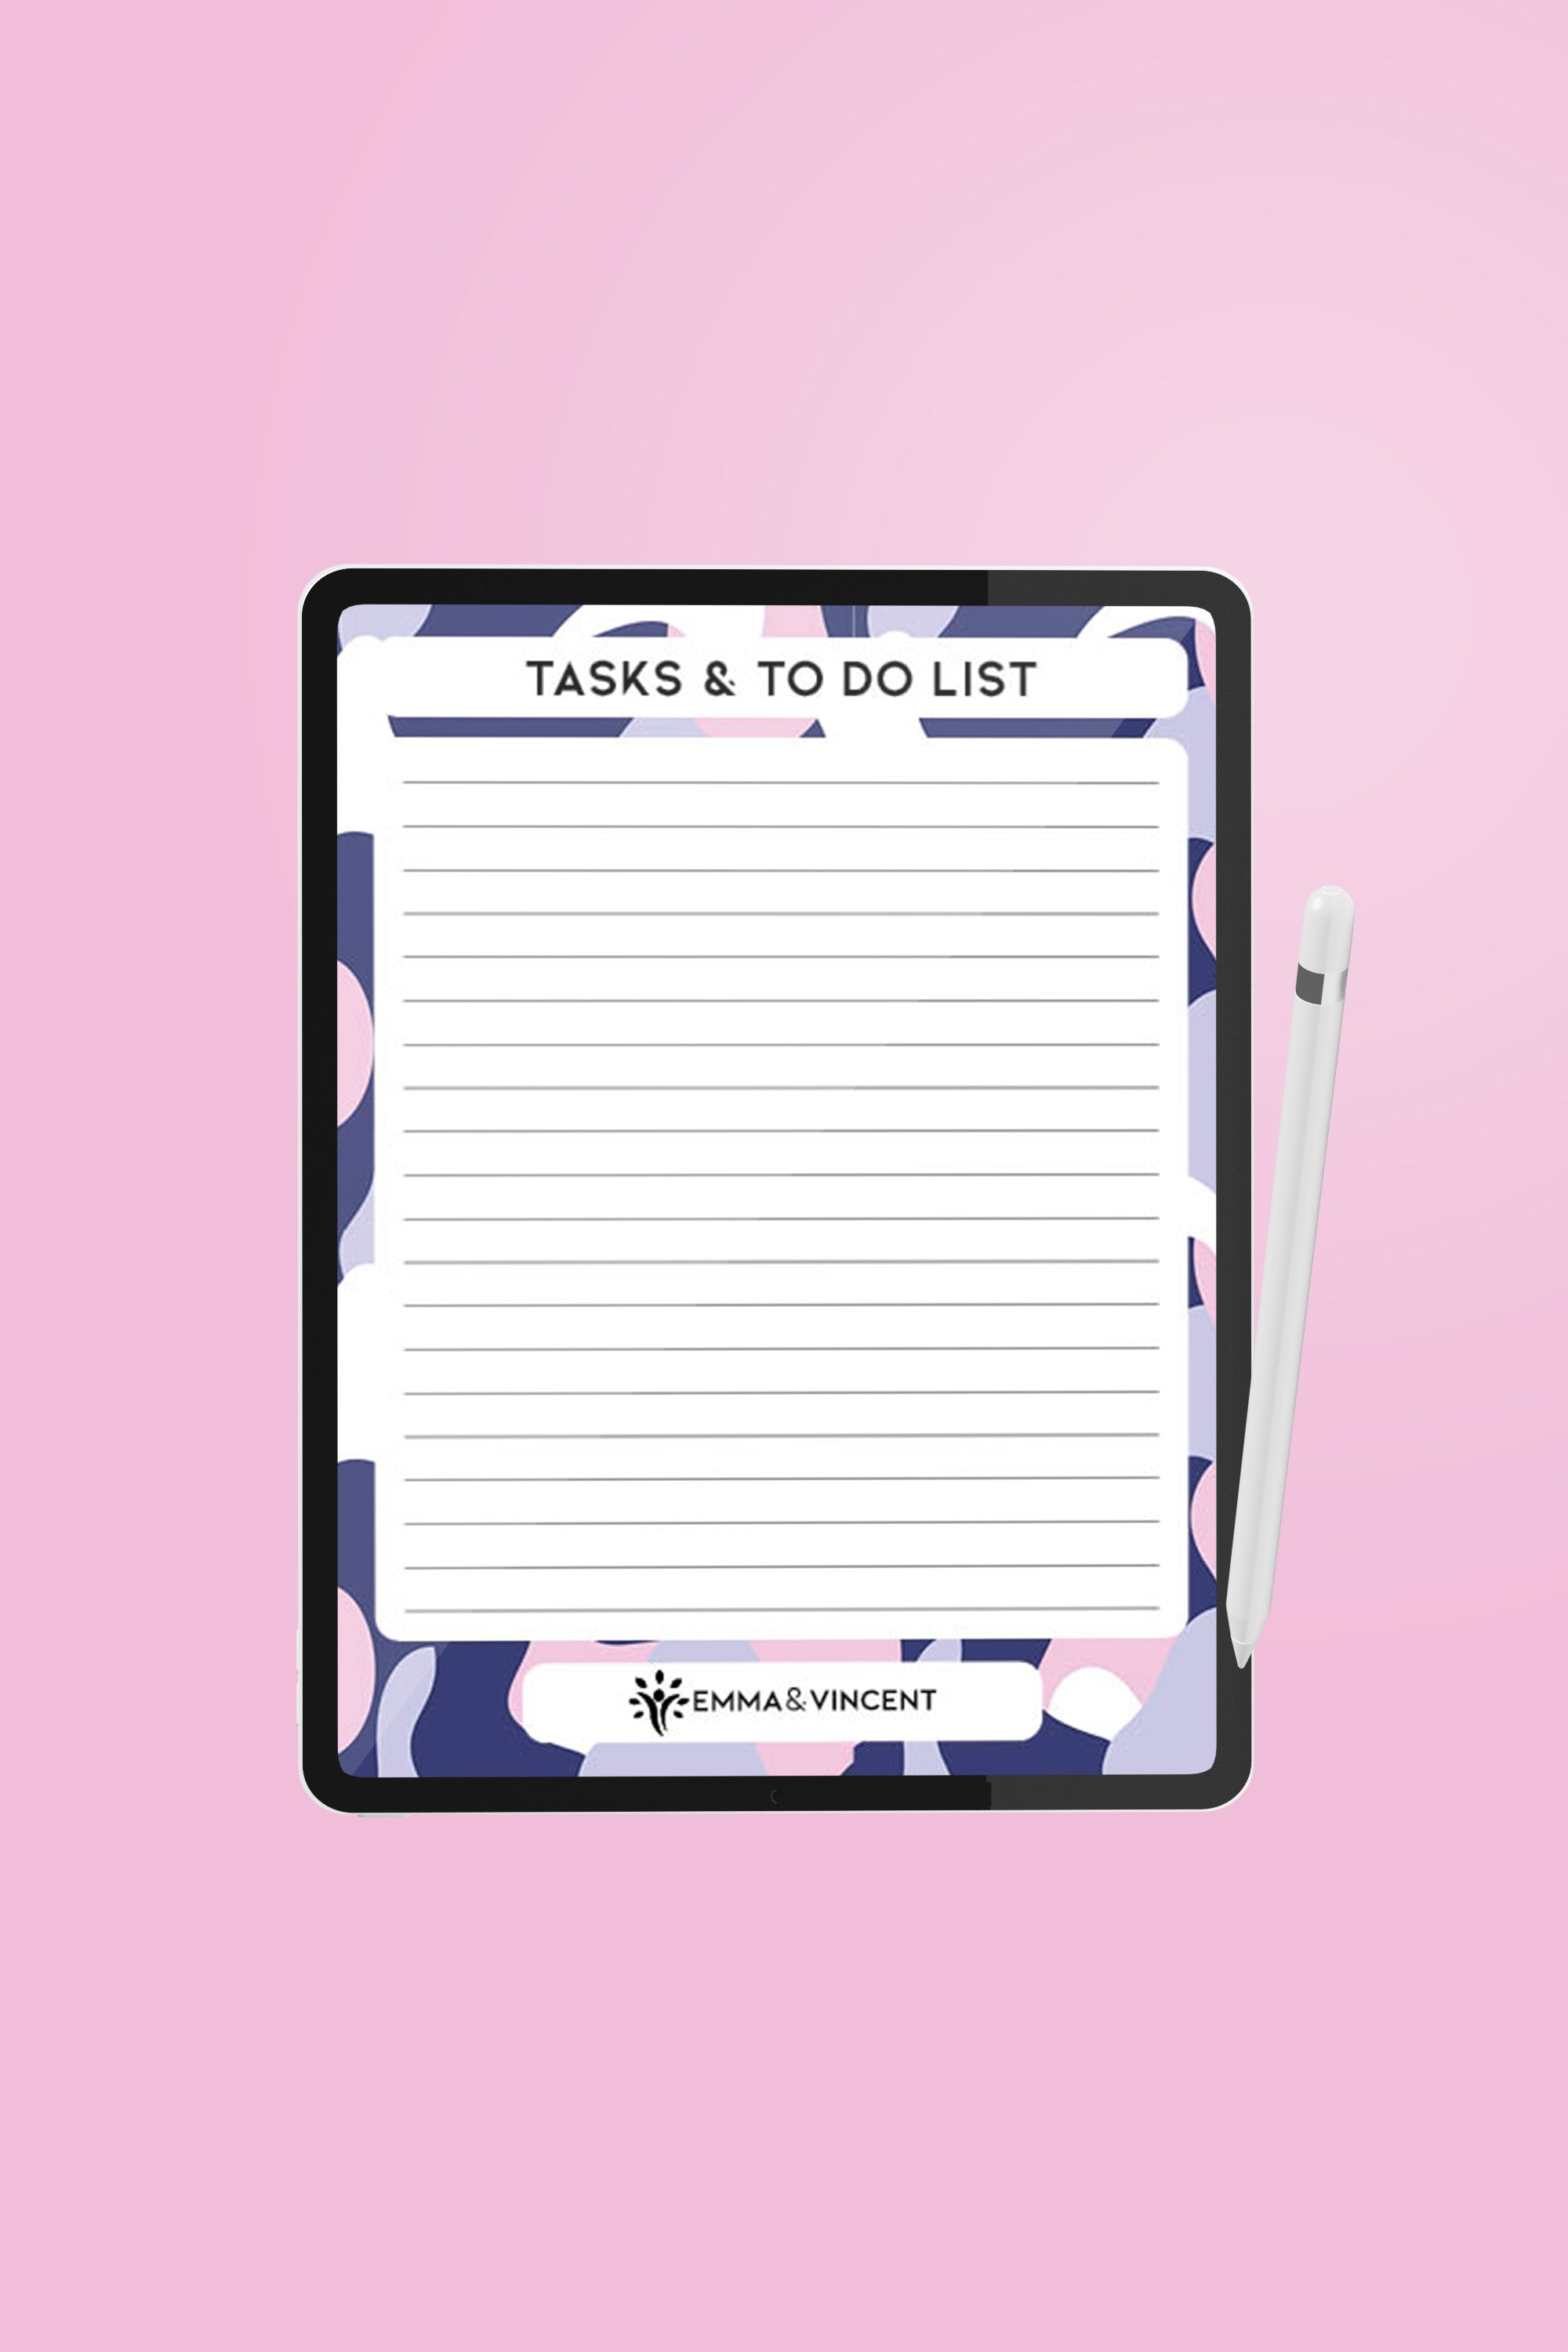 Digital Tasks & To Do List Planner - Flying Colours Pack A - 4 Designs Included!